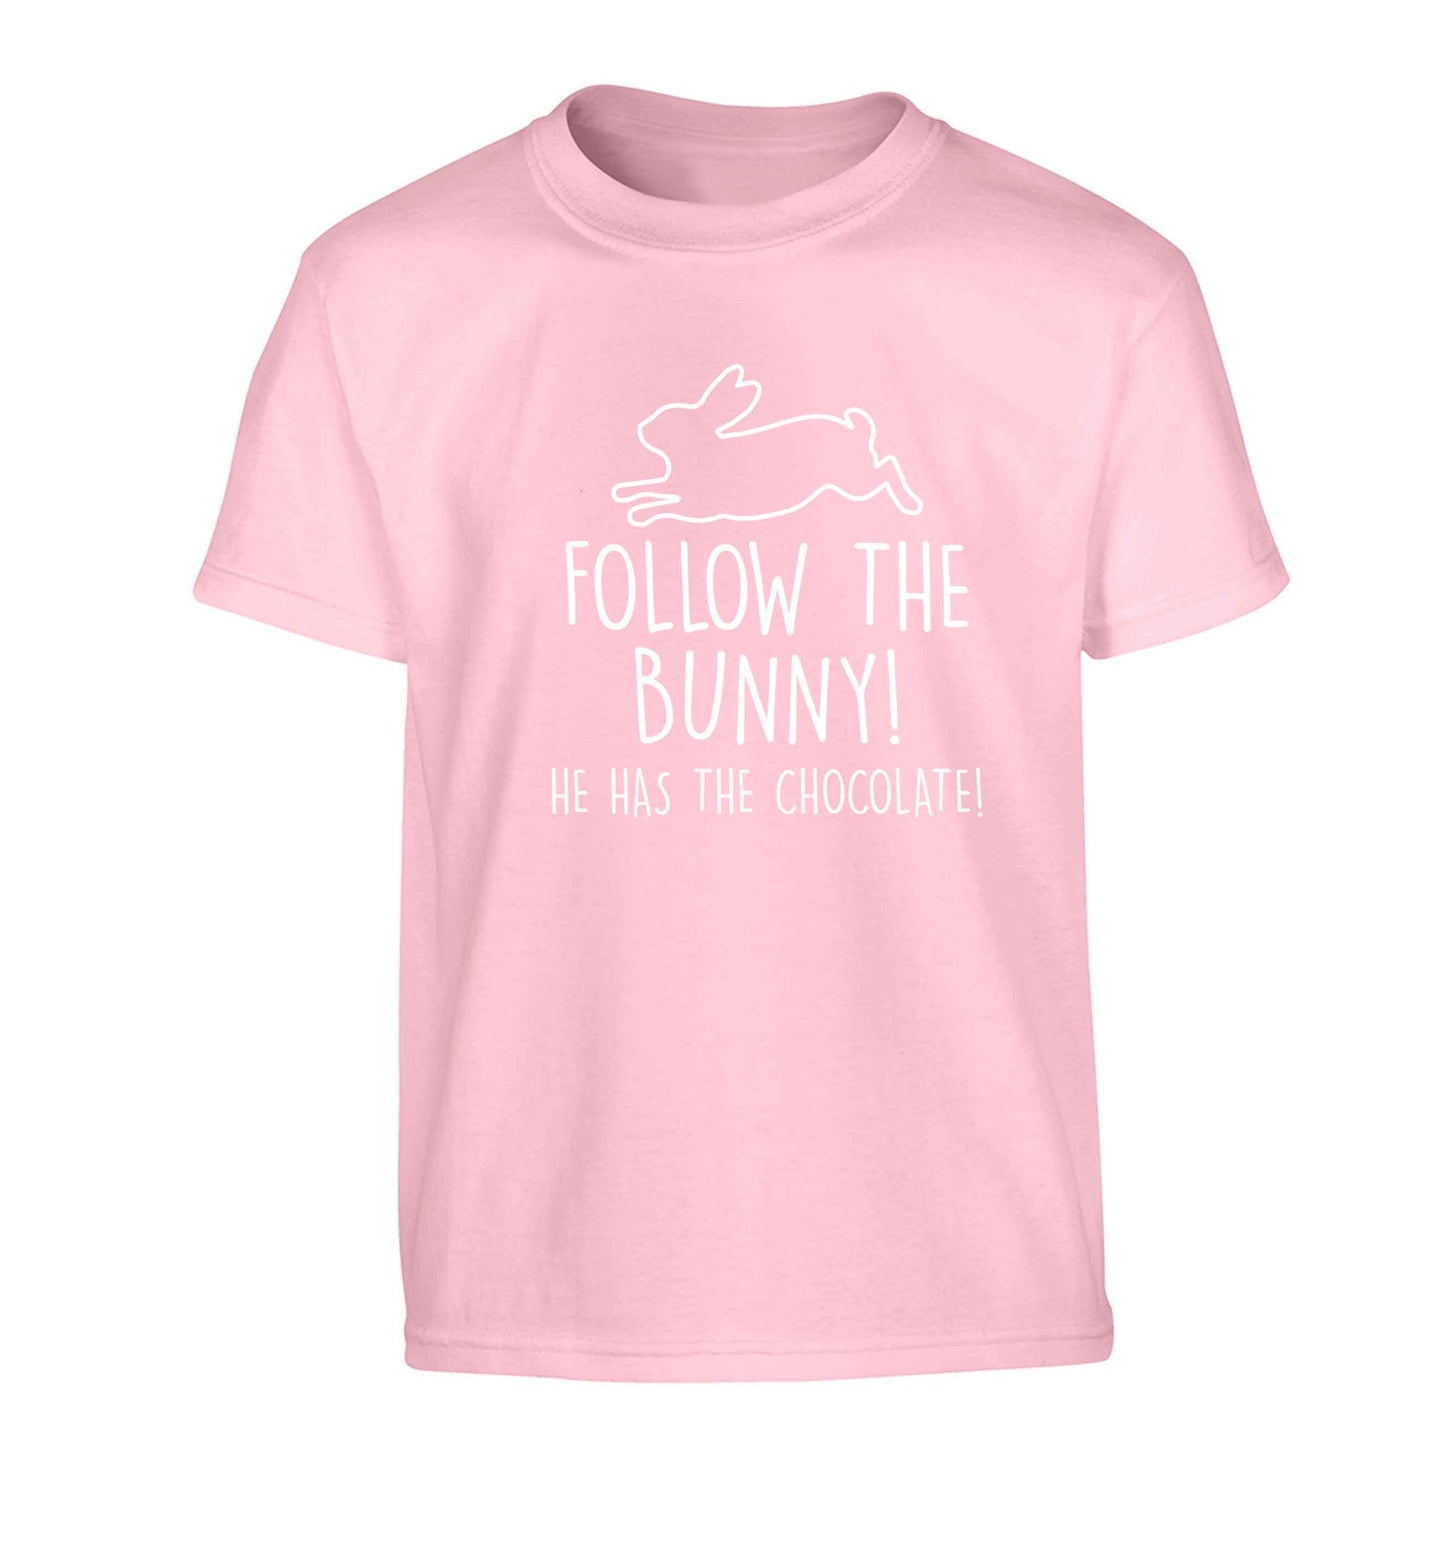 Follow the bunny! He has the chocolate Children's light pink Tshirt 12-13 Years